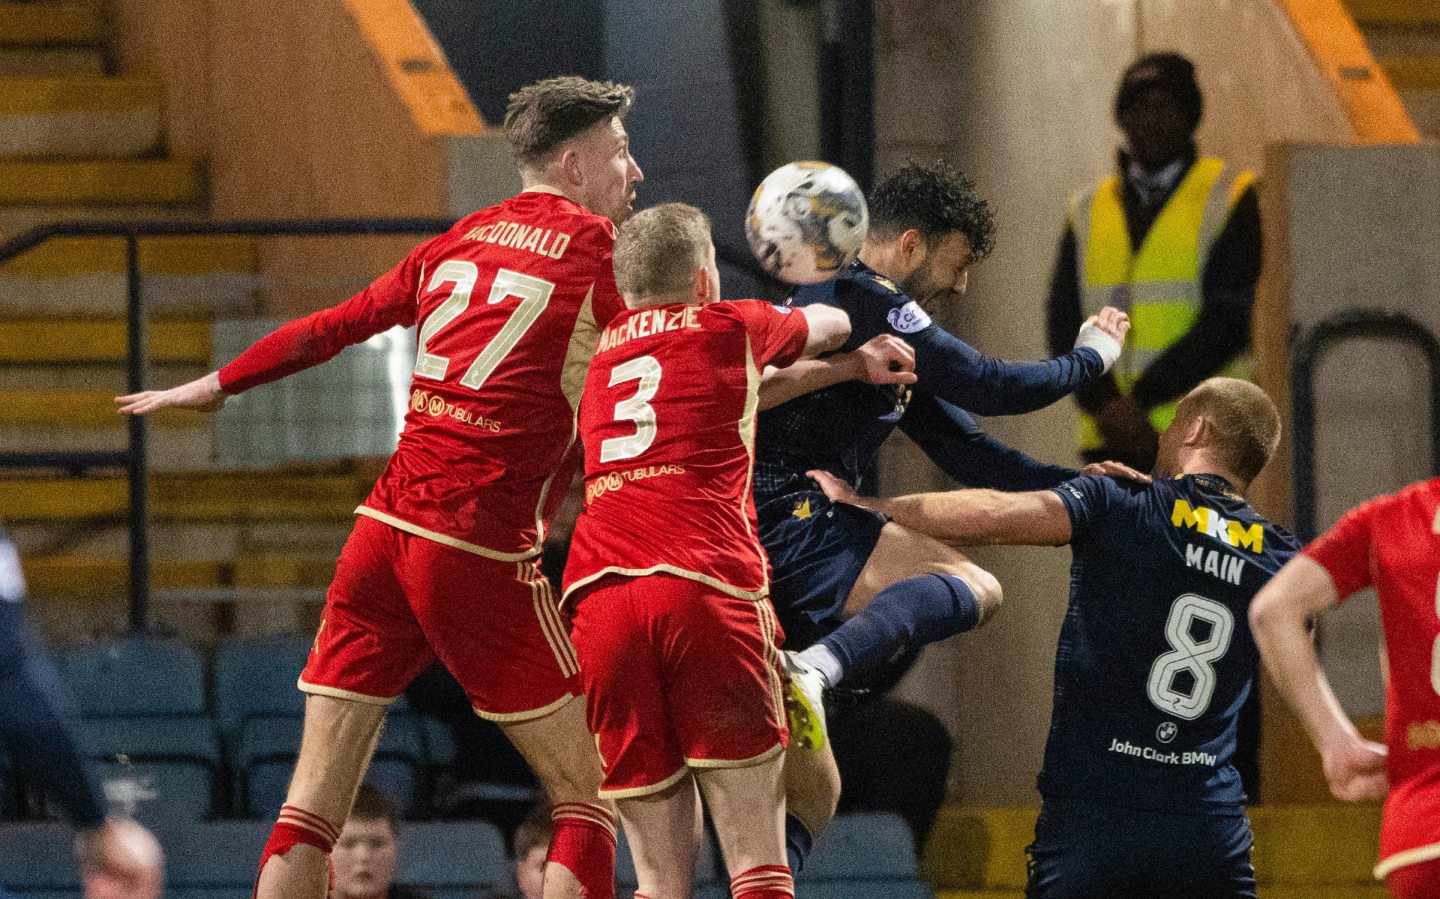 Aberdeen's Jack McKenzie (C) handles the ball in the box to concede a penalty against Dundee. Image: SNS.